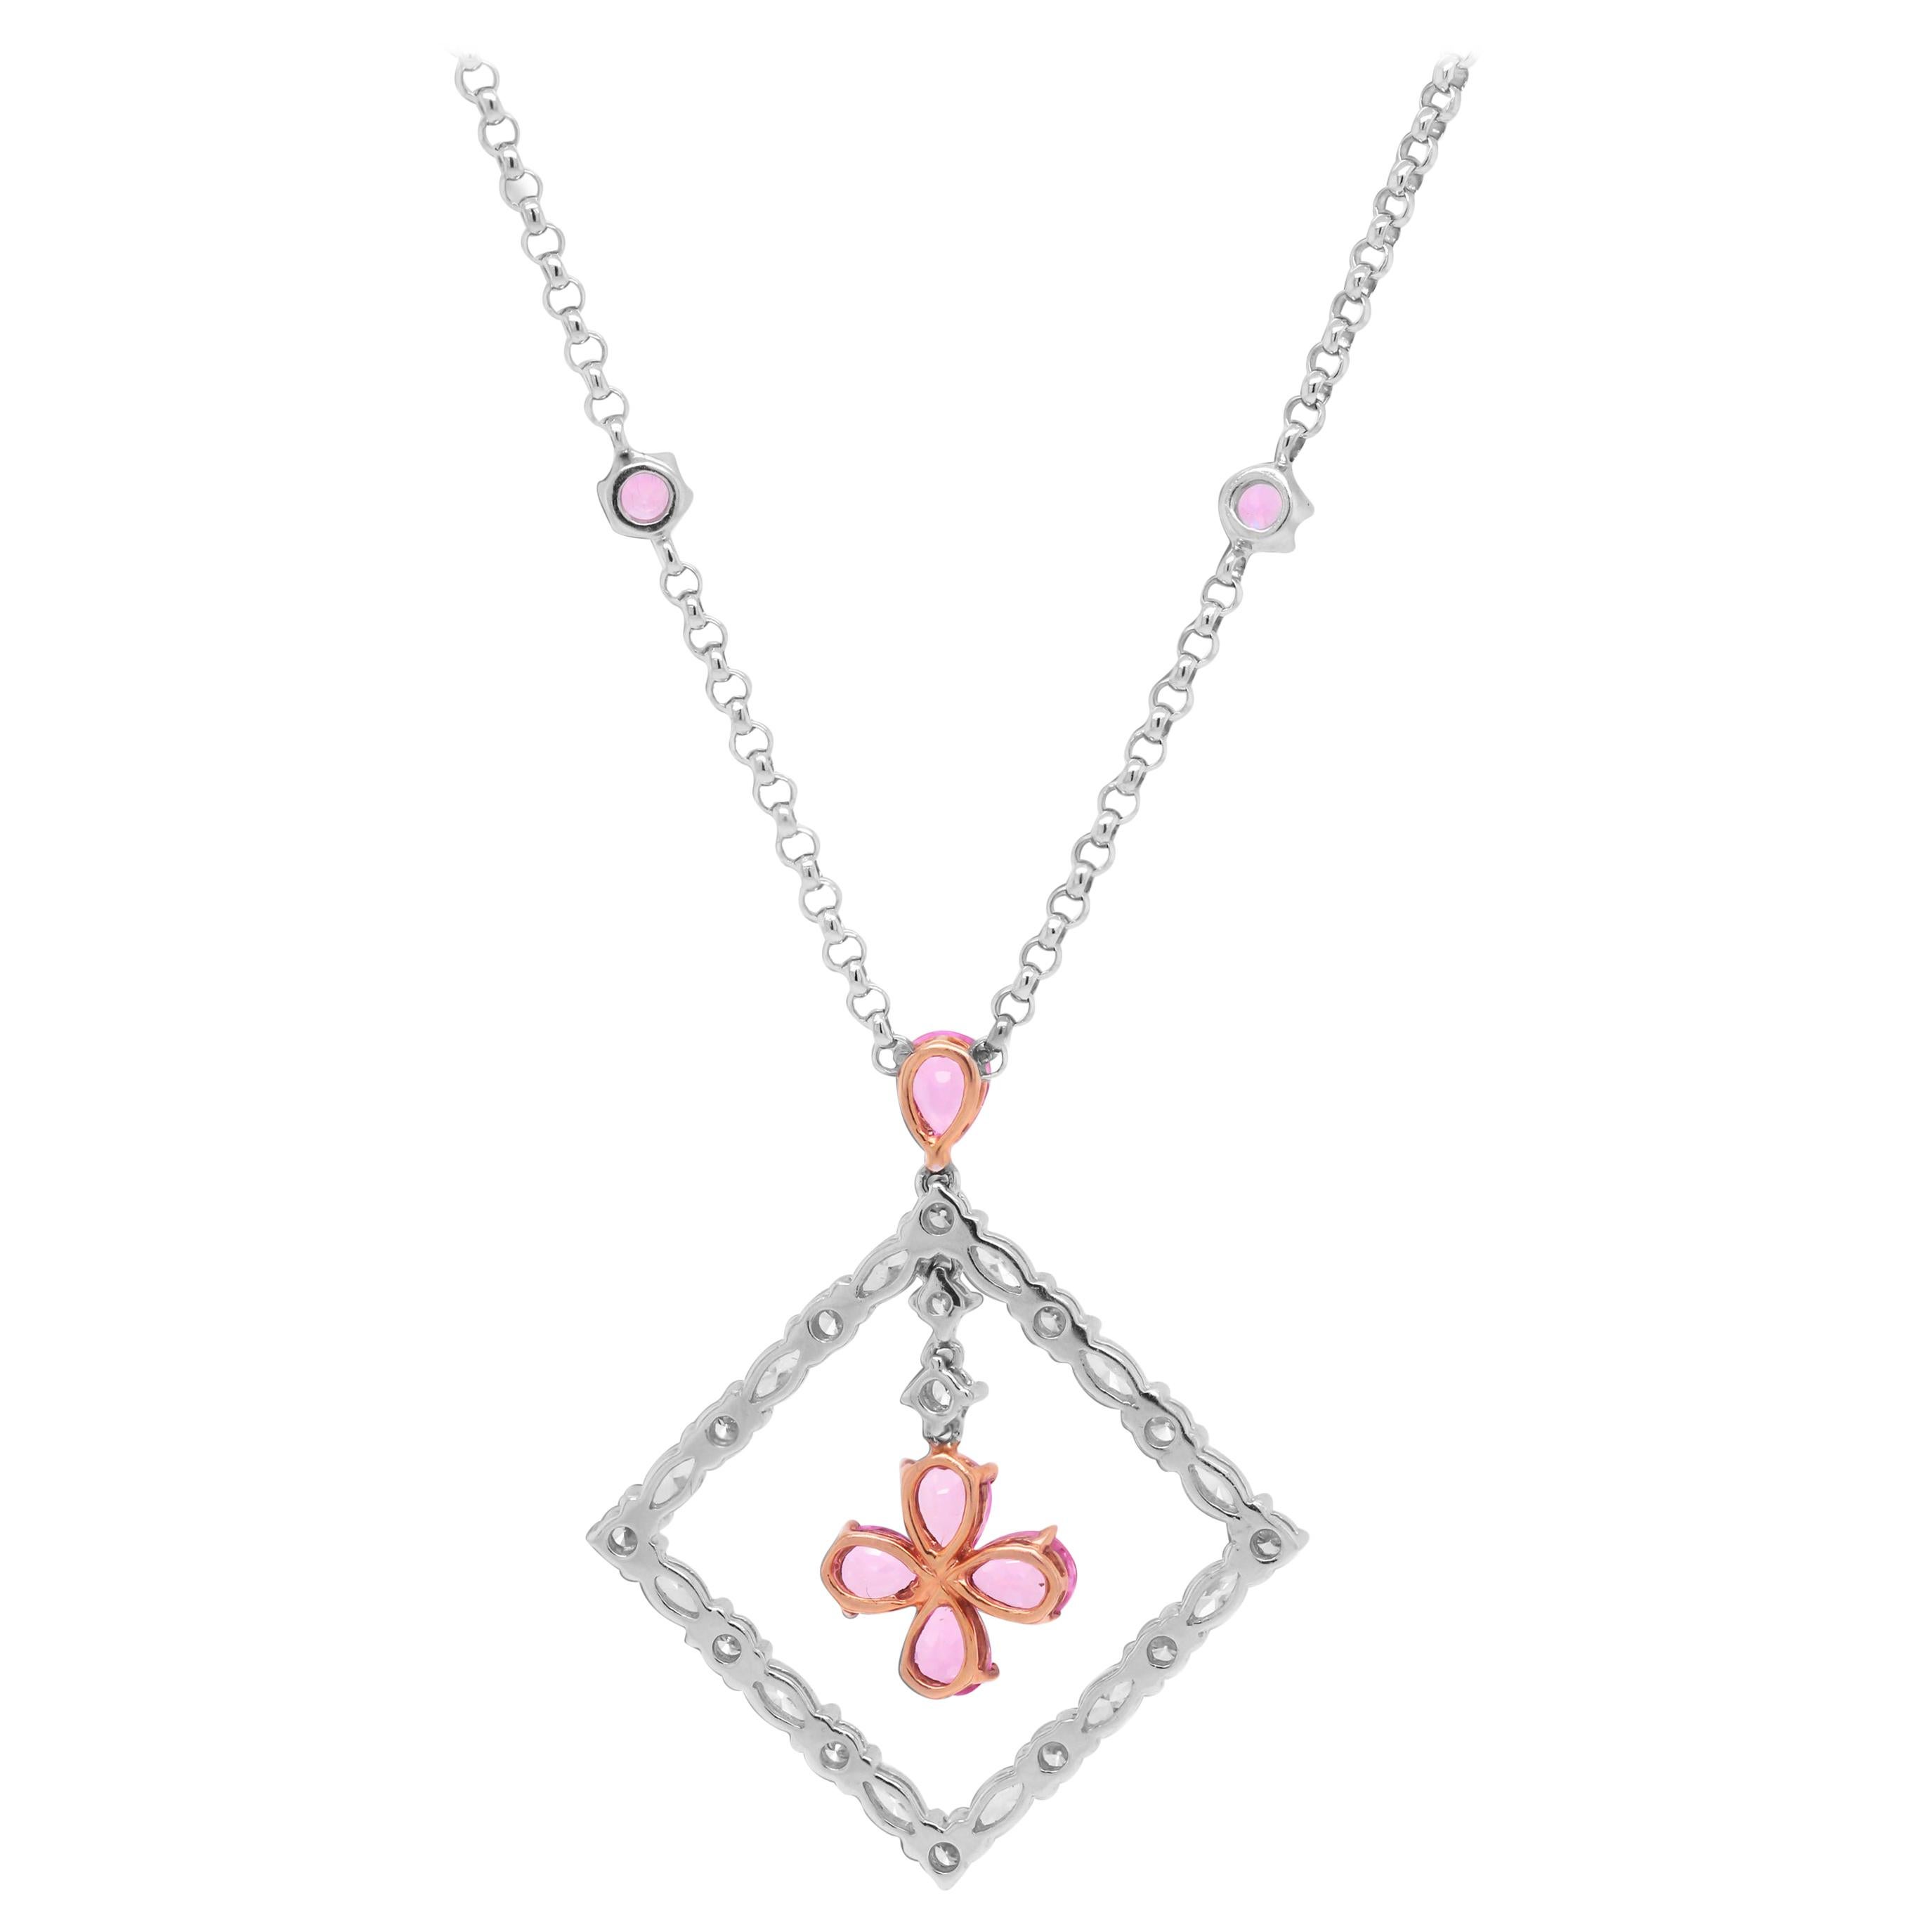 White Gold and Diamond Square Pendant Necklace with Pink Sapphires